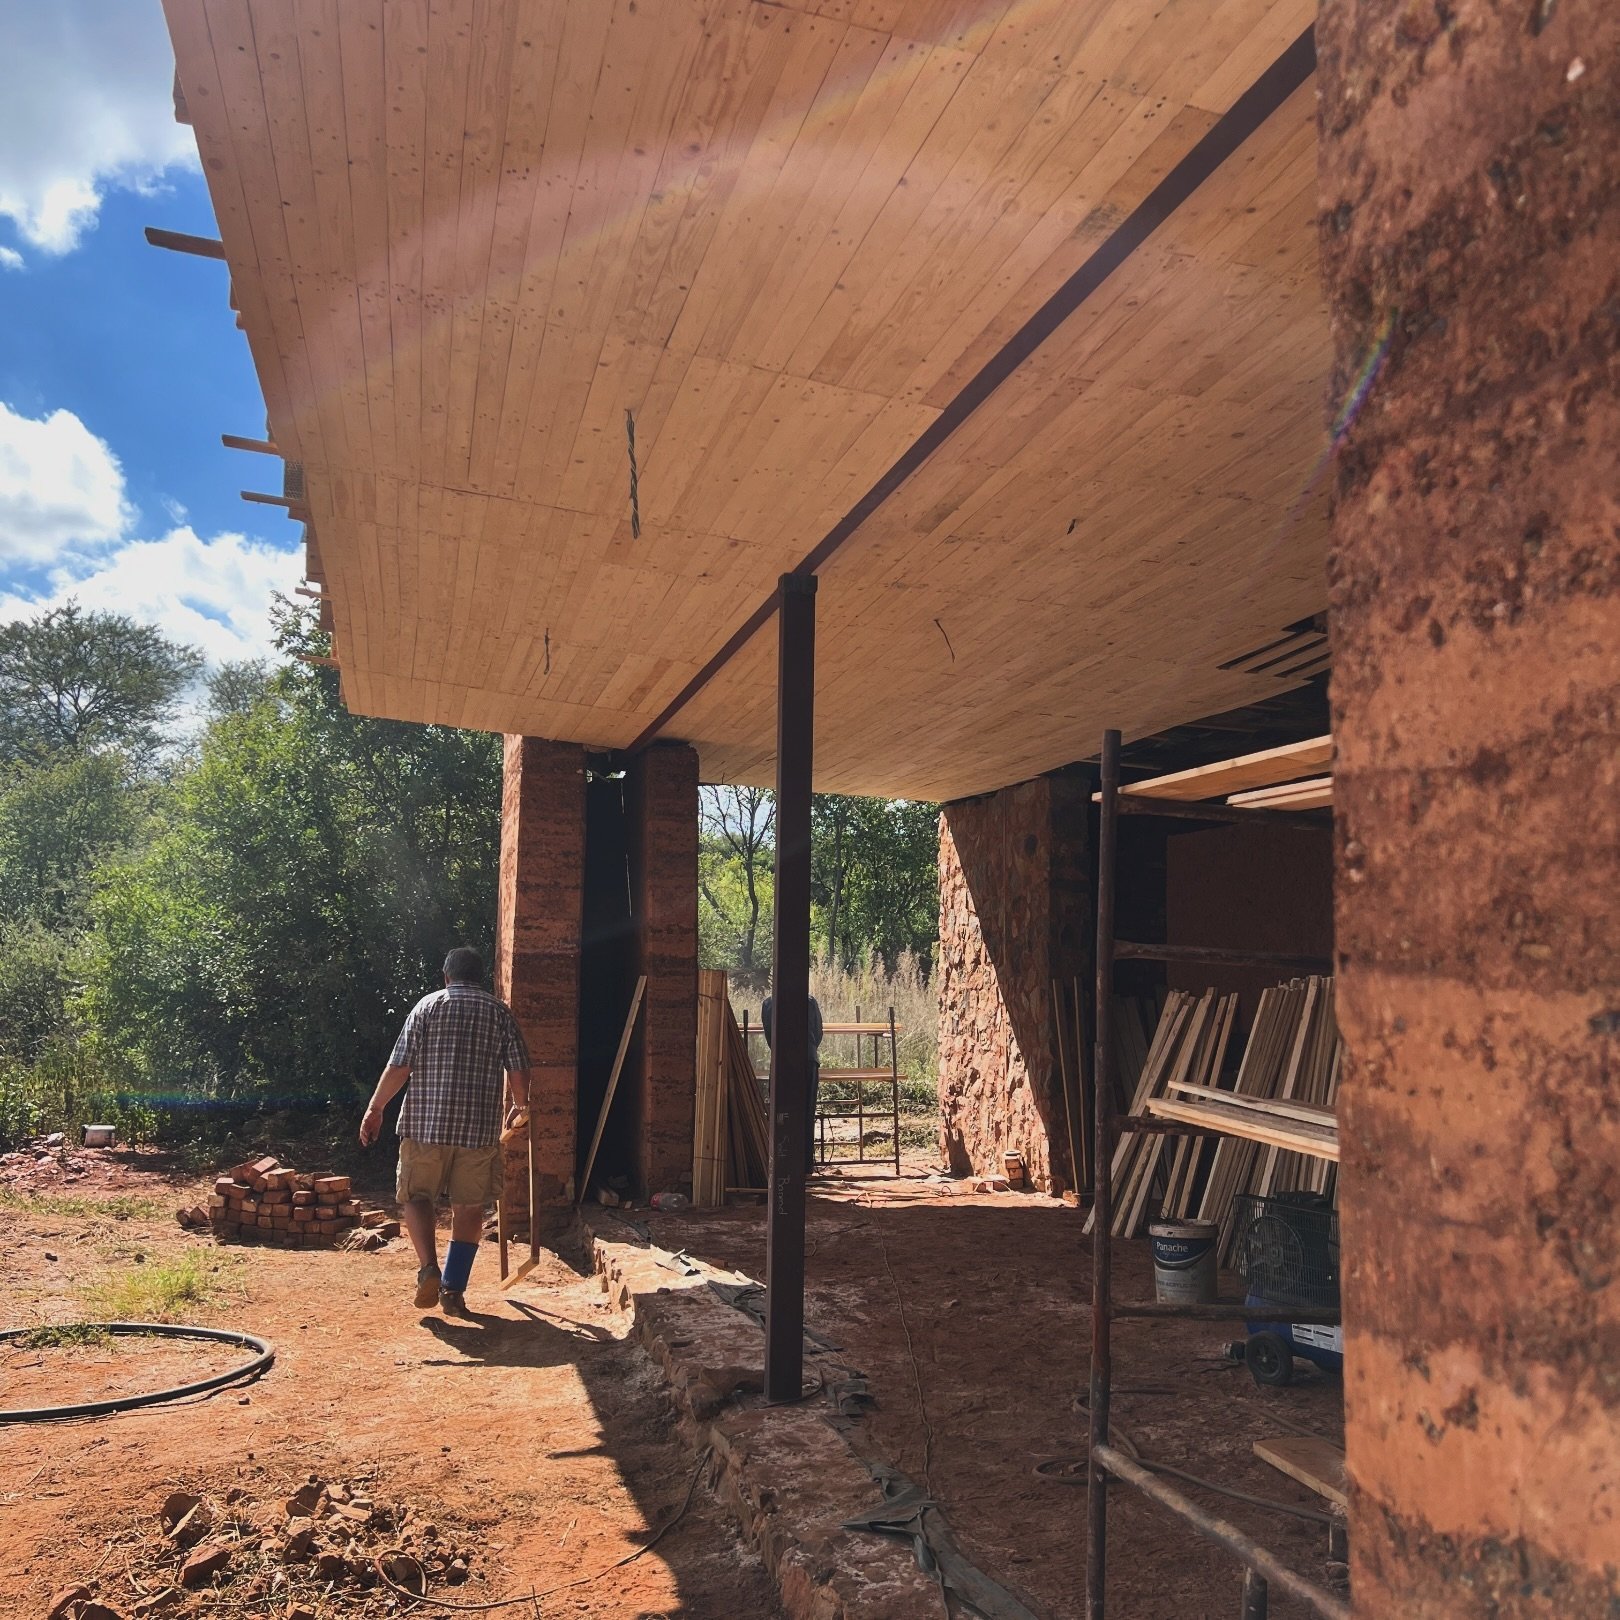 Ceiling is nearing completion ☀️

#naturalbuilding #rammedearth #sustainabilty #womeninarchitecture